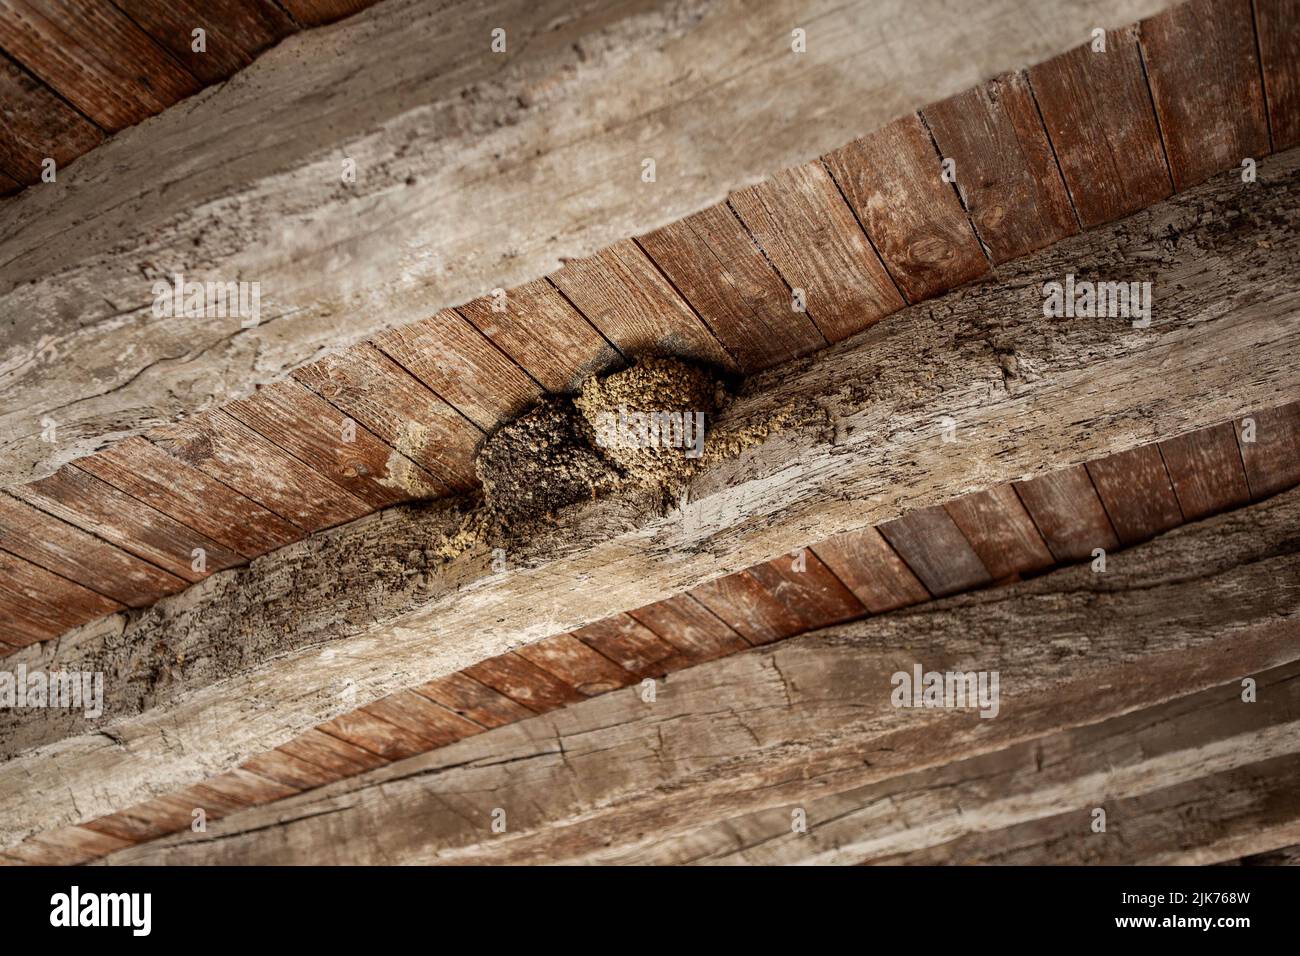 Swallows nest under wooden beams Stock Photo